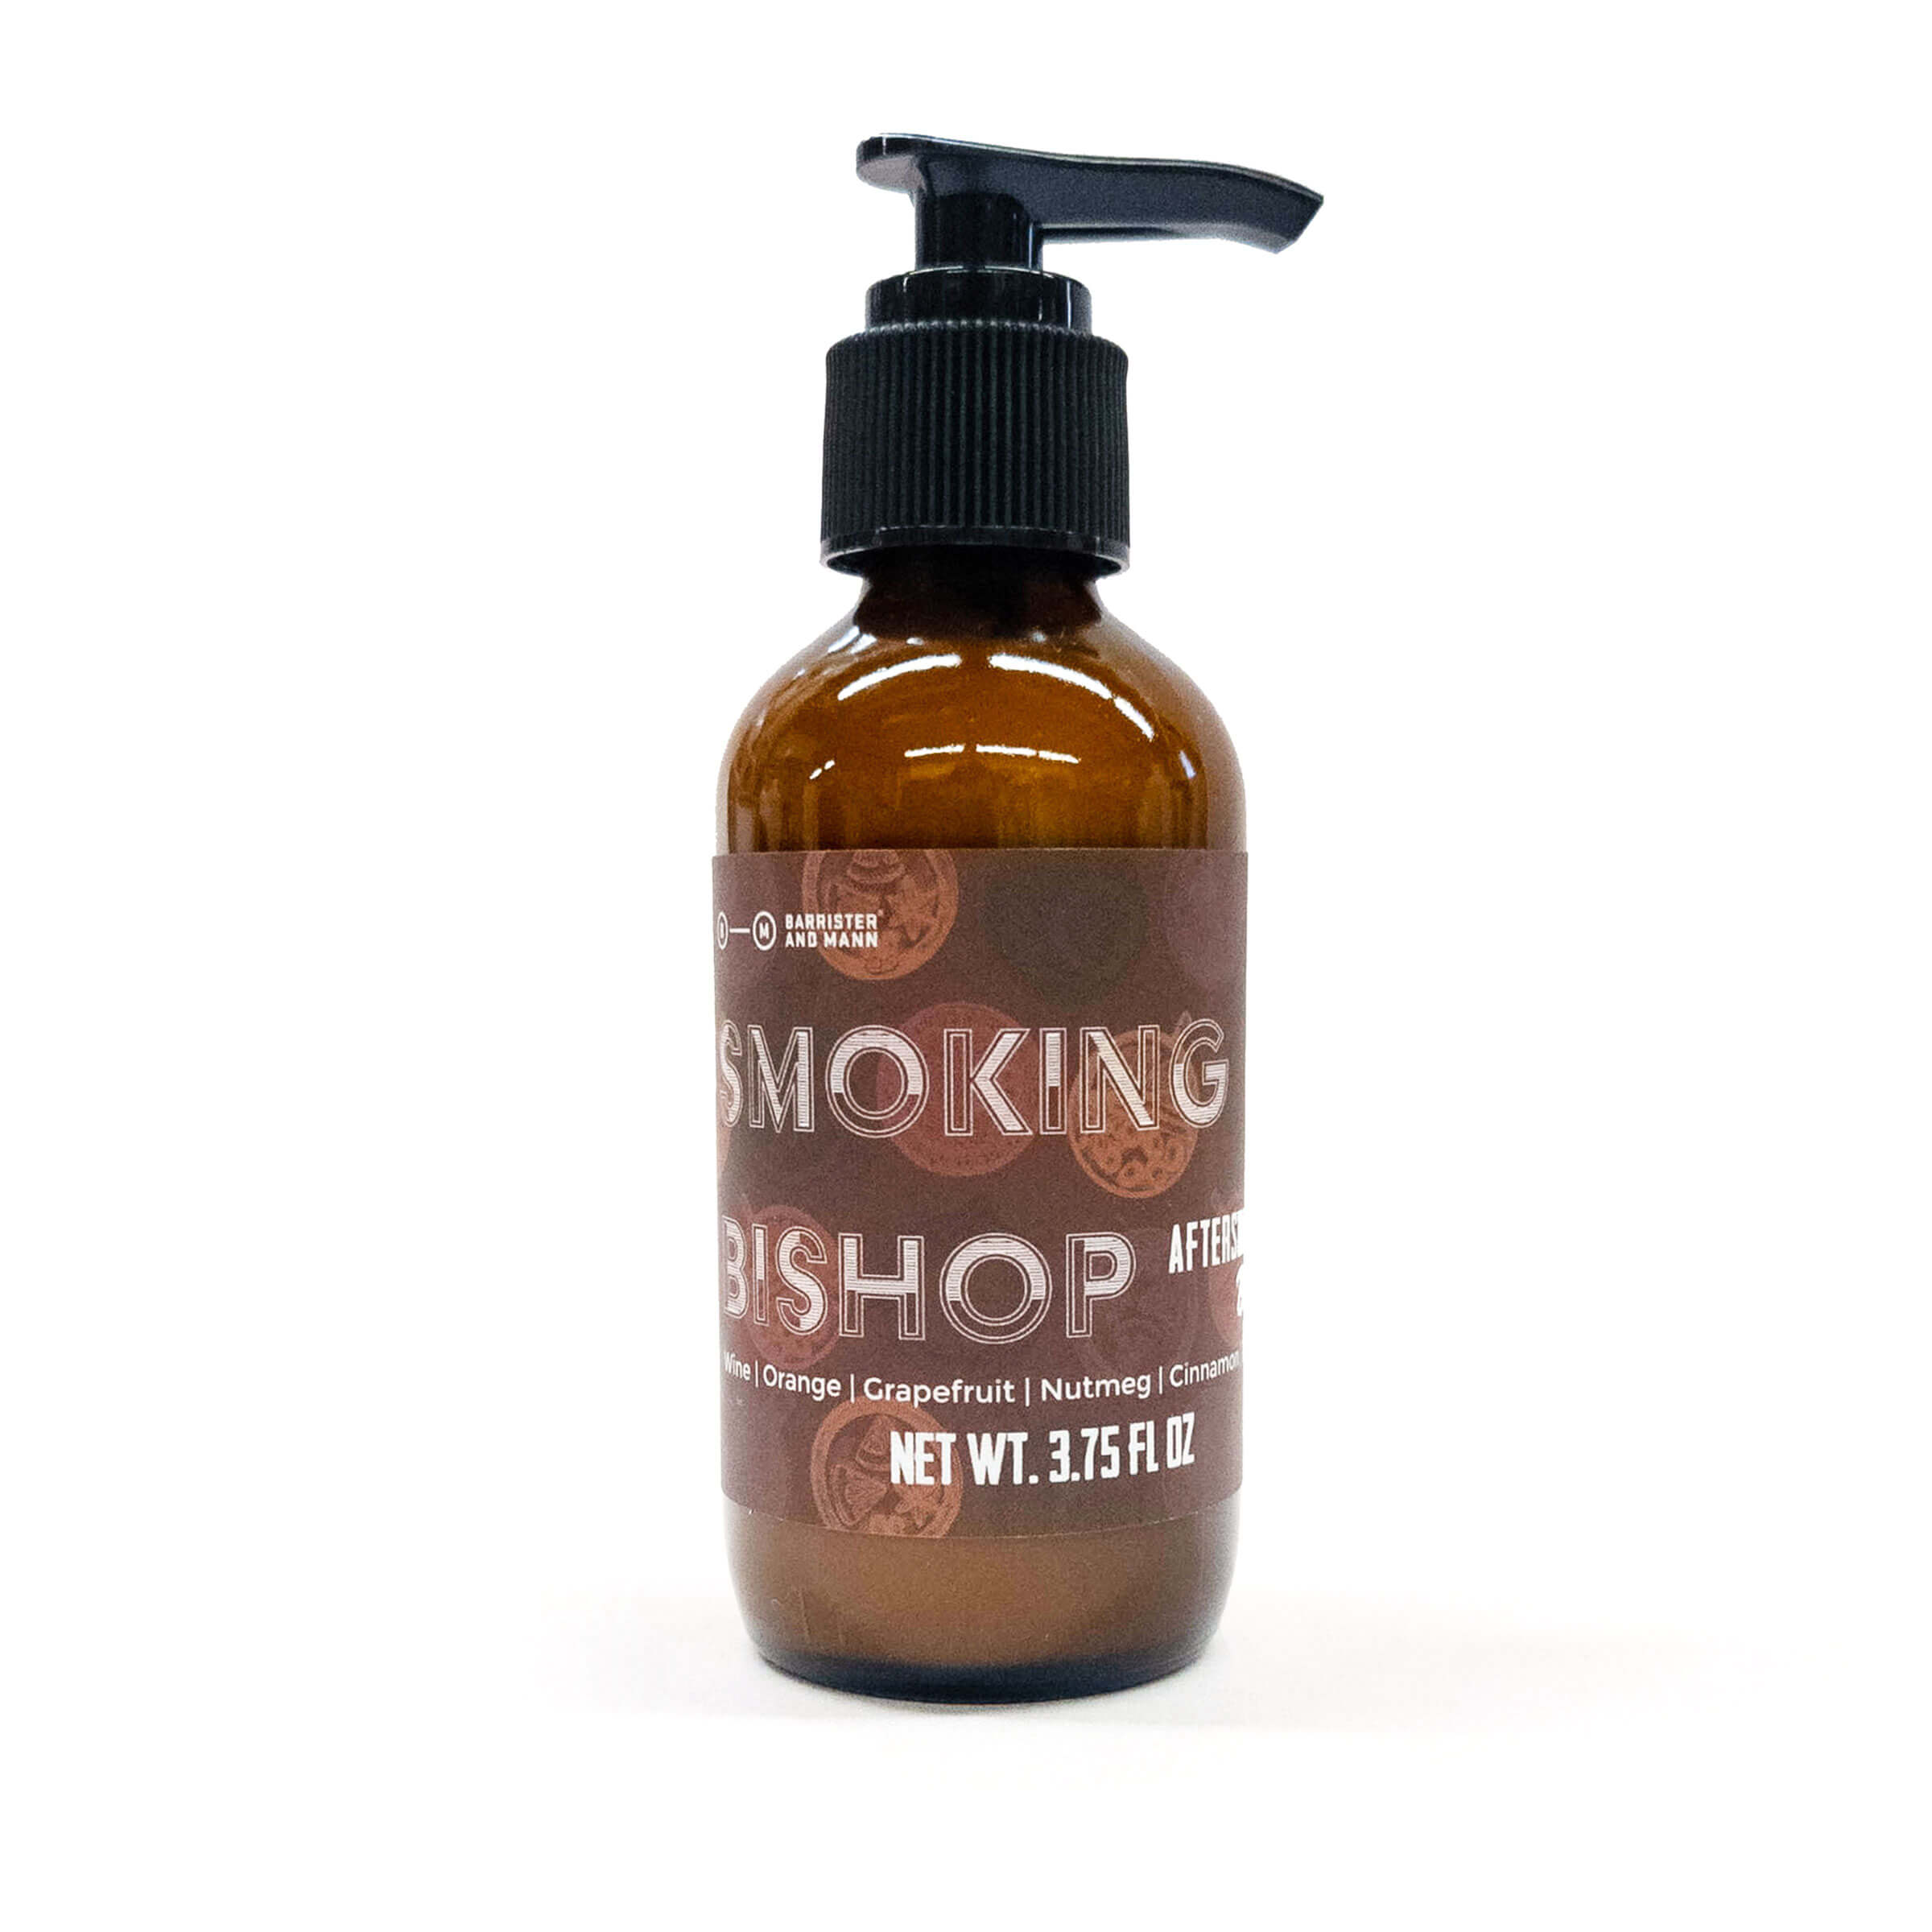 Barrister and Mann Smoking Bishop Aftershave Balm